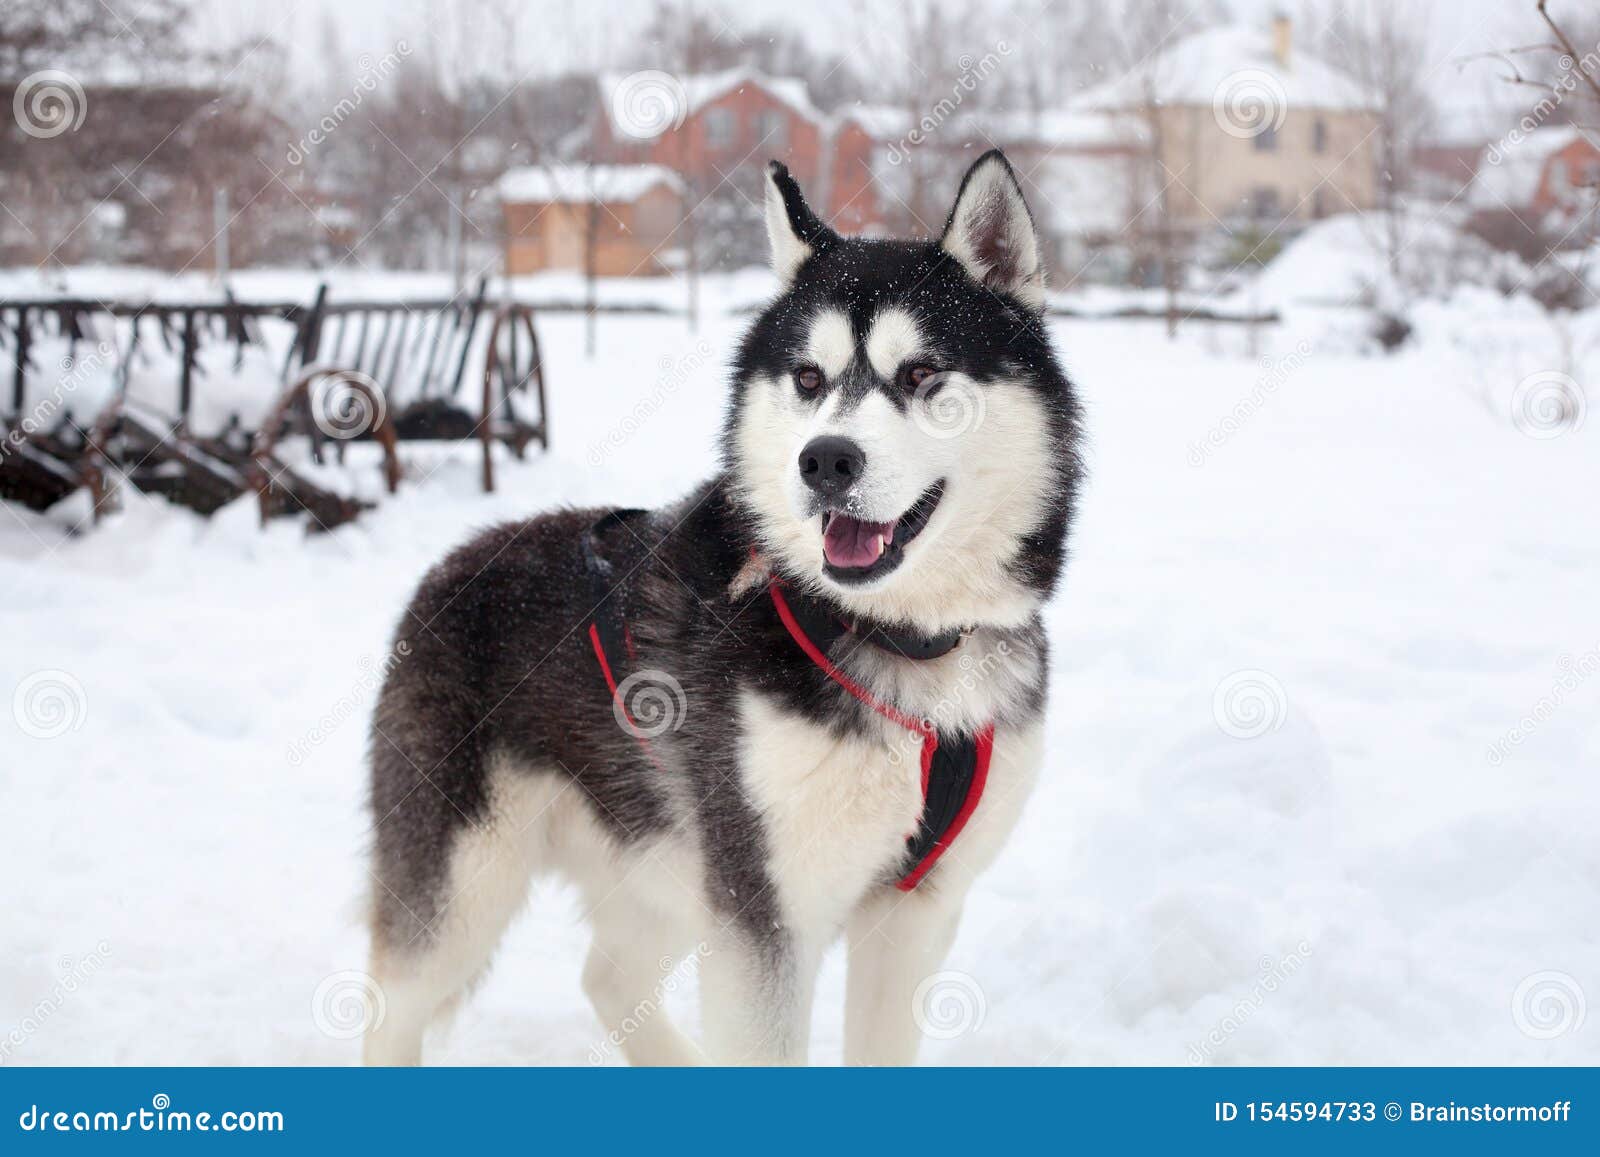 One Beautiful Siberian Husky With Pink Tongue On White Snow Background Closeup Black Furry Alaskan Malamute With Red Harness Stock Image Image Of Canine Nature 154594733